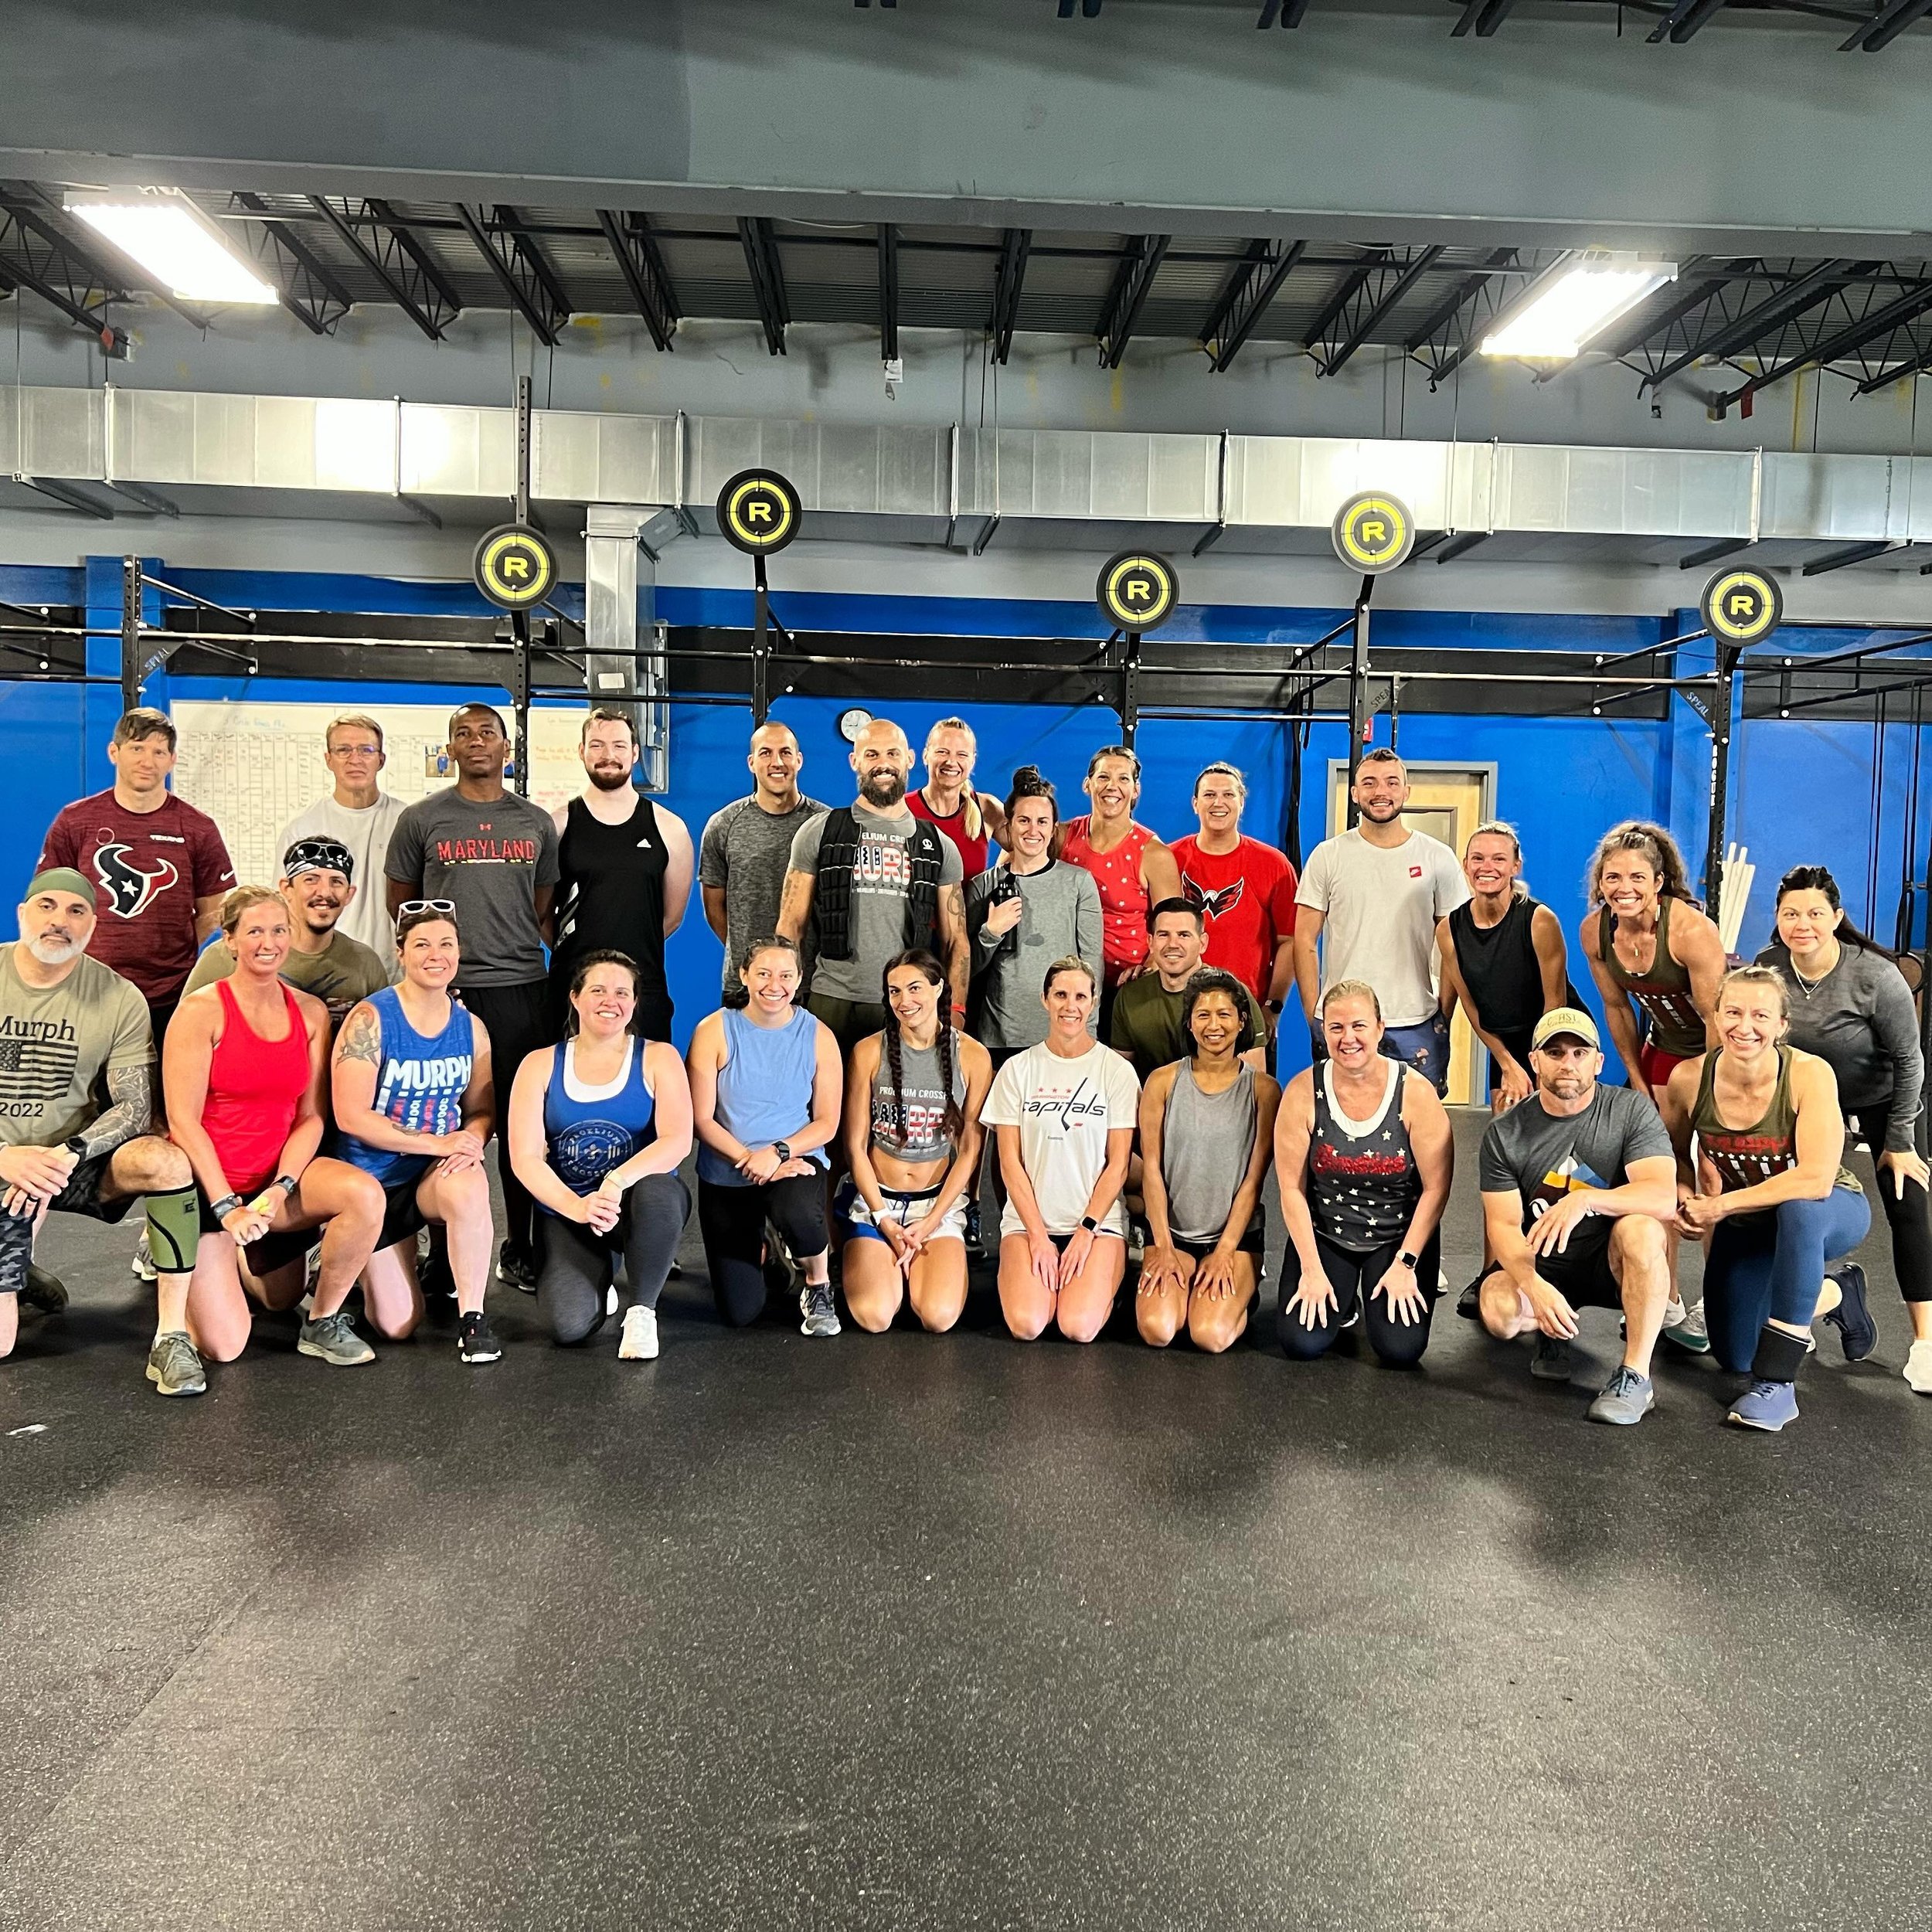 Thanks to everyone who came out for the Memorial Day Murph workout 💪🏽 🇺🇸 

It was an honor to have each and every one of you there!

Happy Memorial Day weekend! Stay safe &amp; happy unofficial start to the summer ☀️ 

#memorialdaymurph2024 #murp